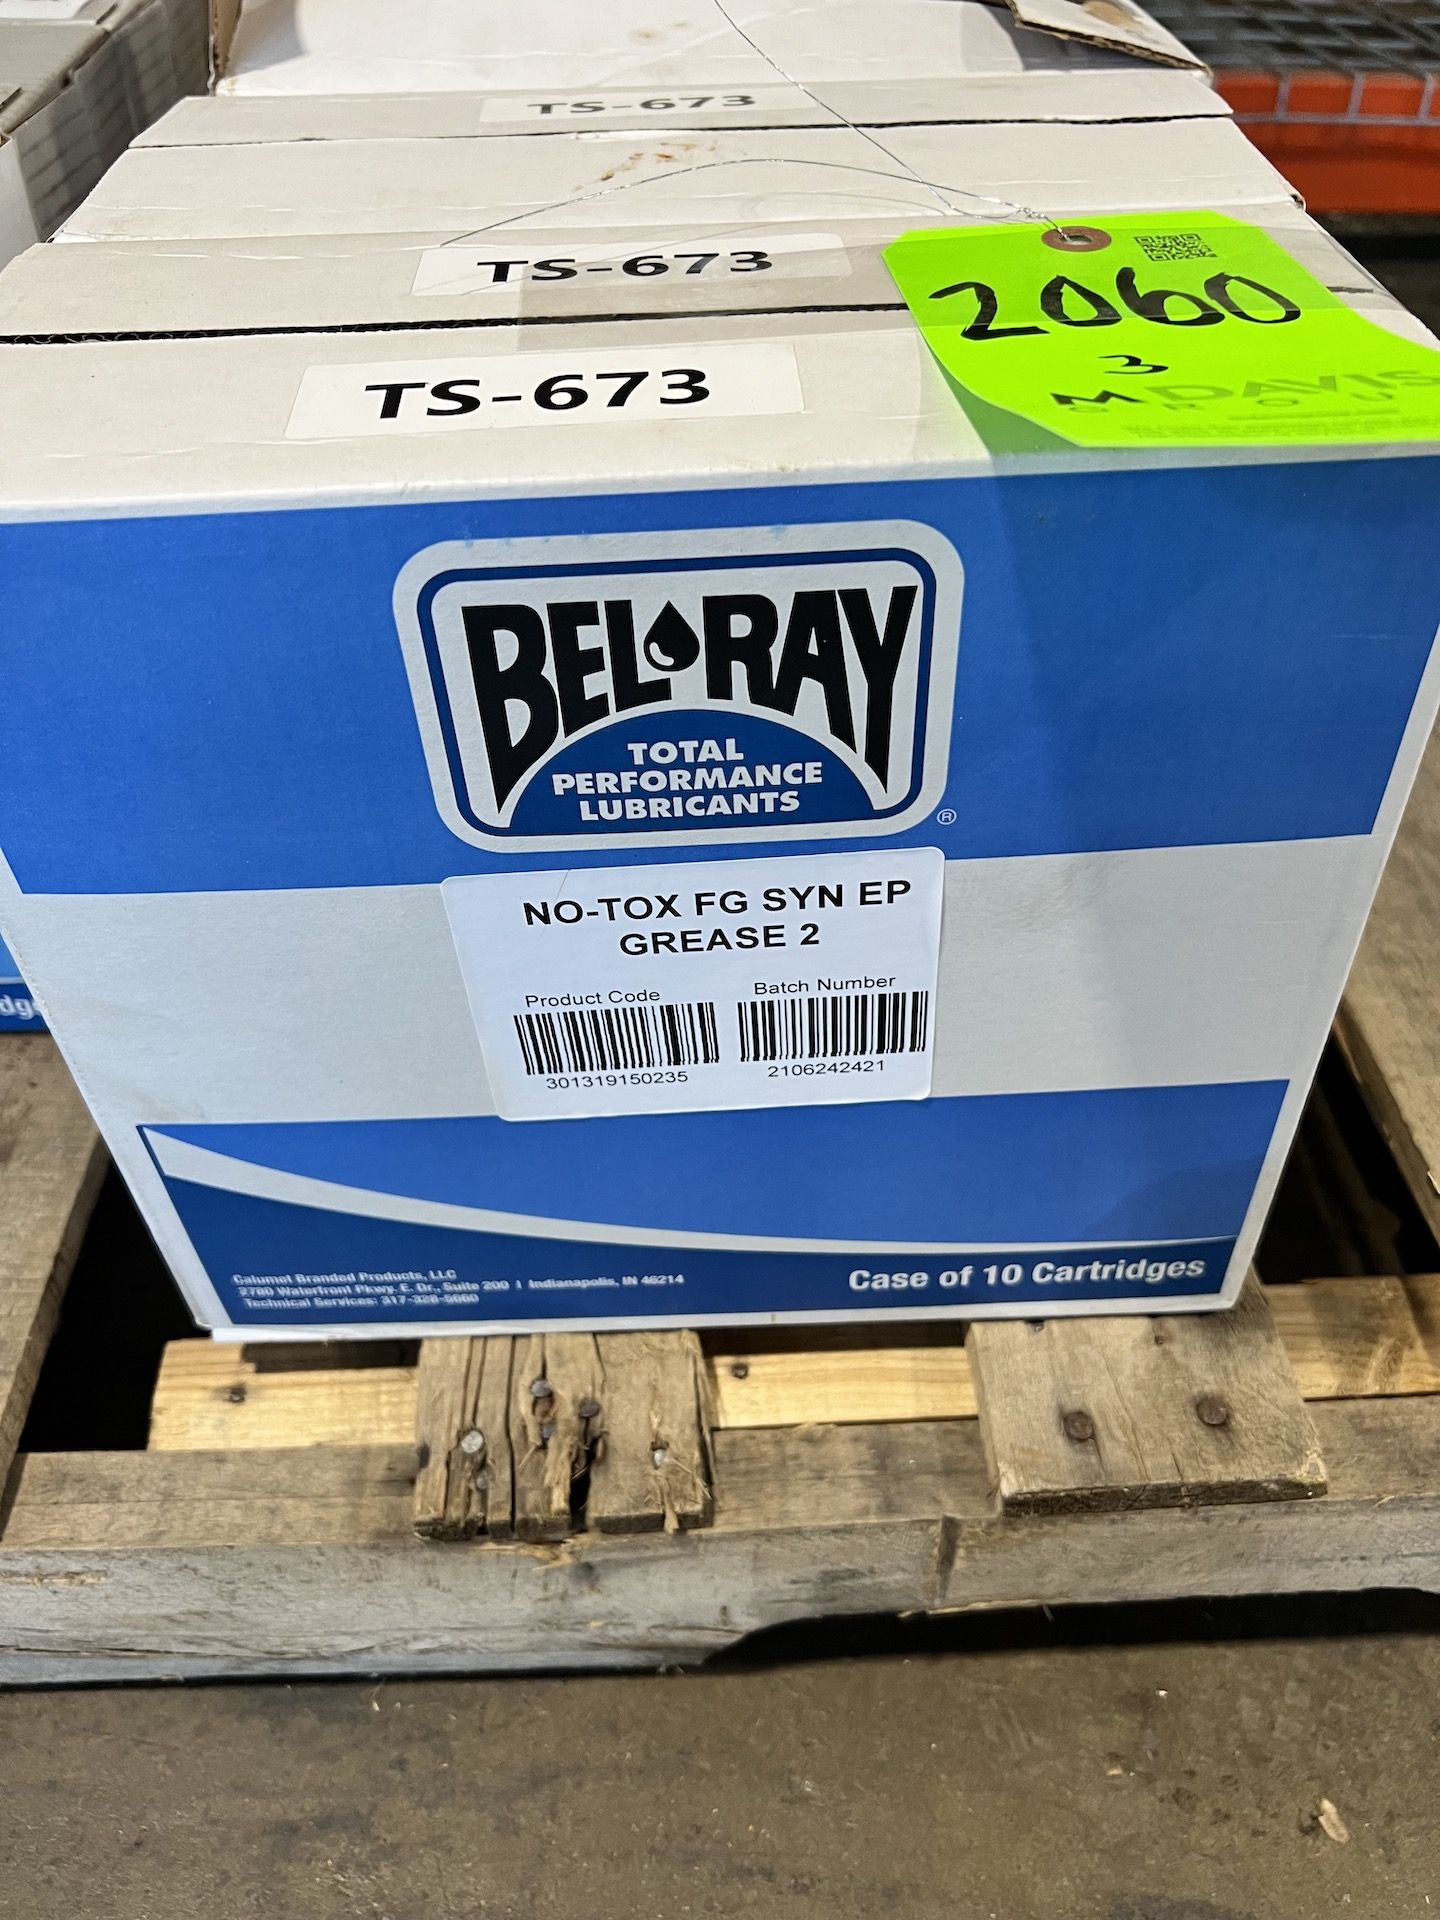 (2.8) Belray No Tox, Food Grade, Synthetic EP Grease 2, Cartridge, # 301319150235 (10 per case) - Image 2 of 2